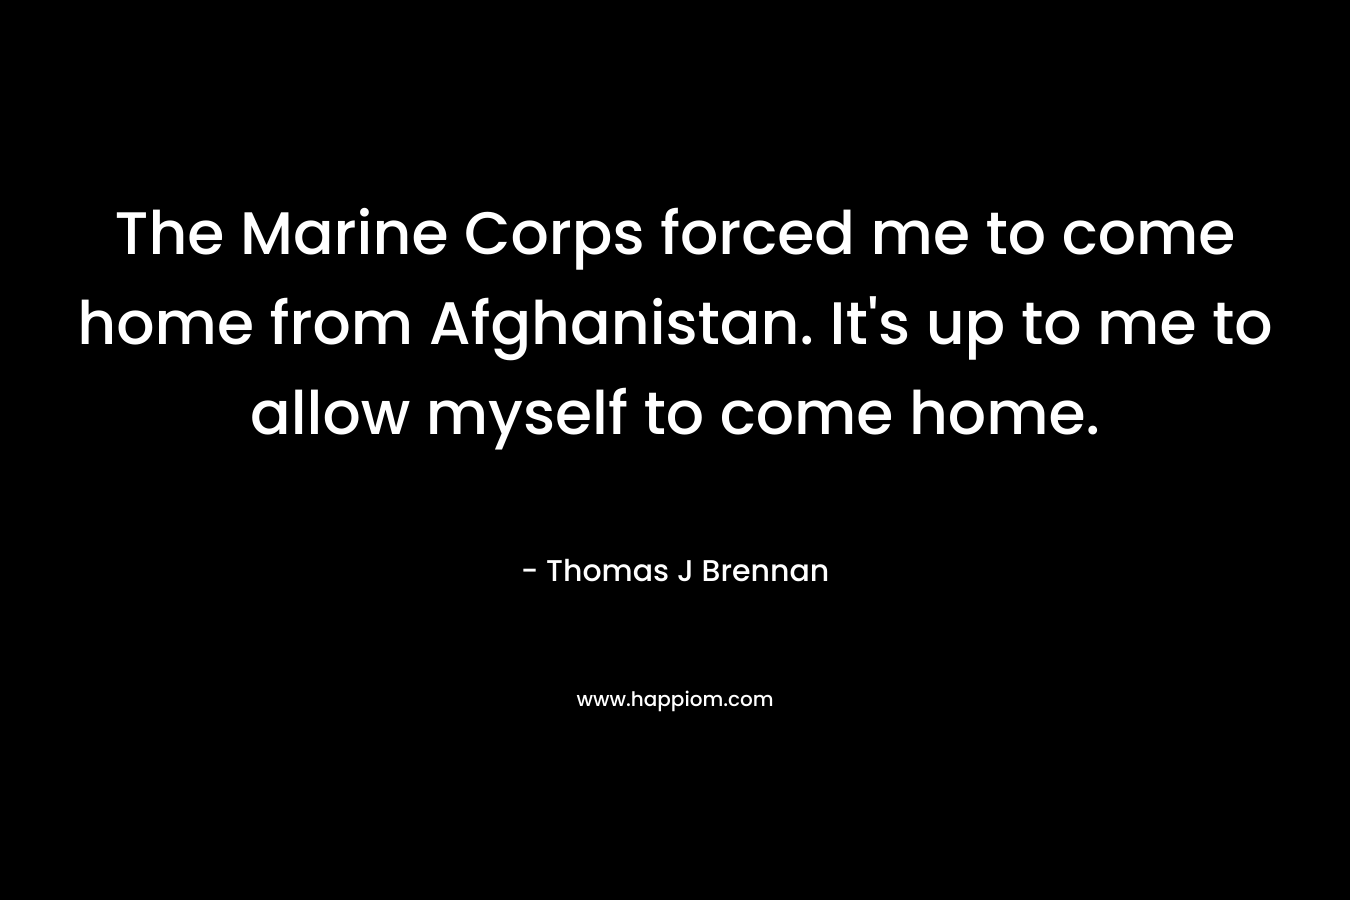 The Marine Corps forced me to come home from Afghanistan. It's up to me to allow myself to come home.